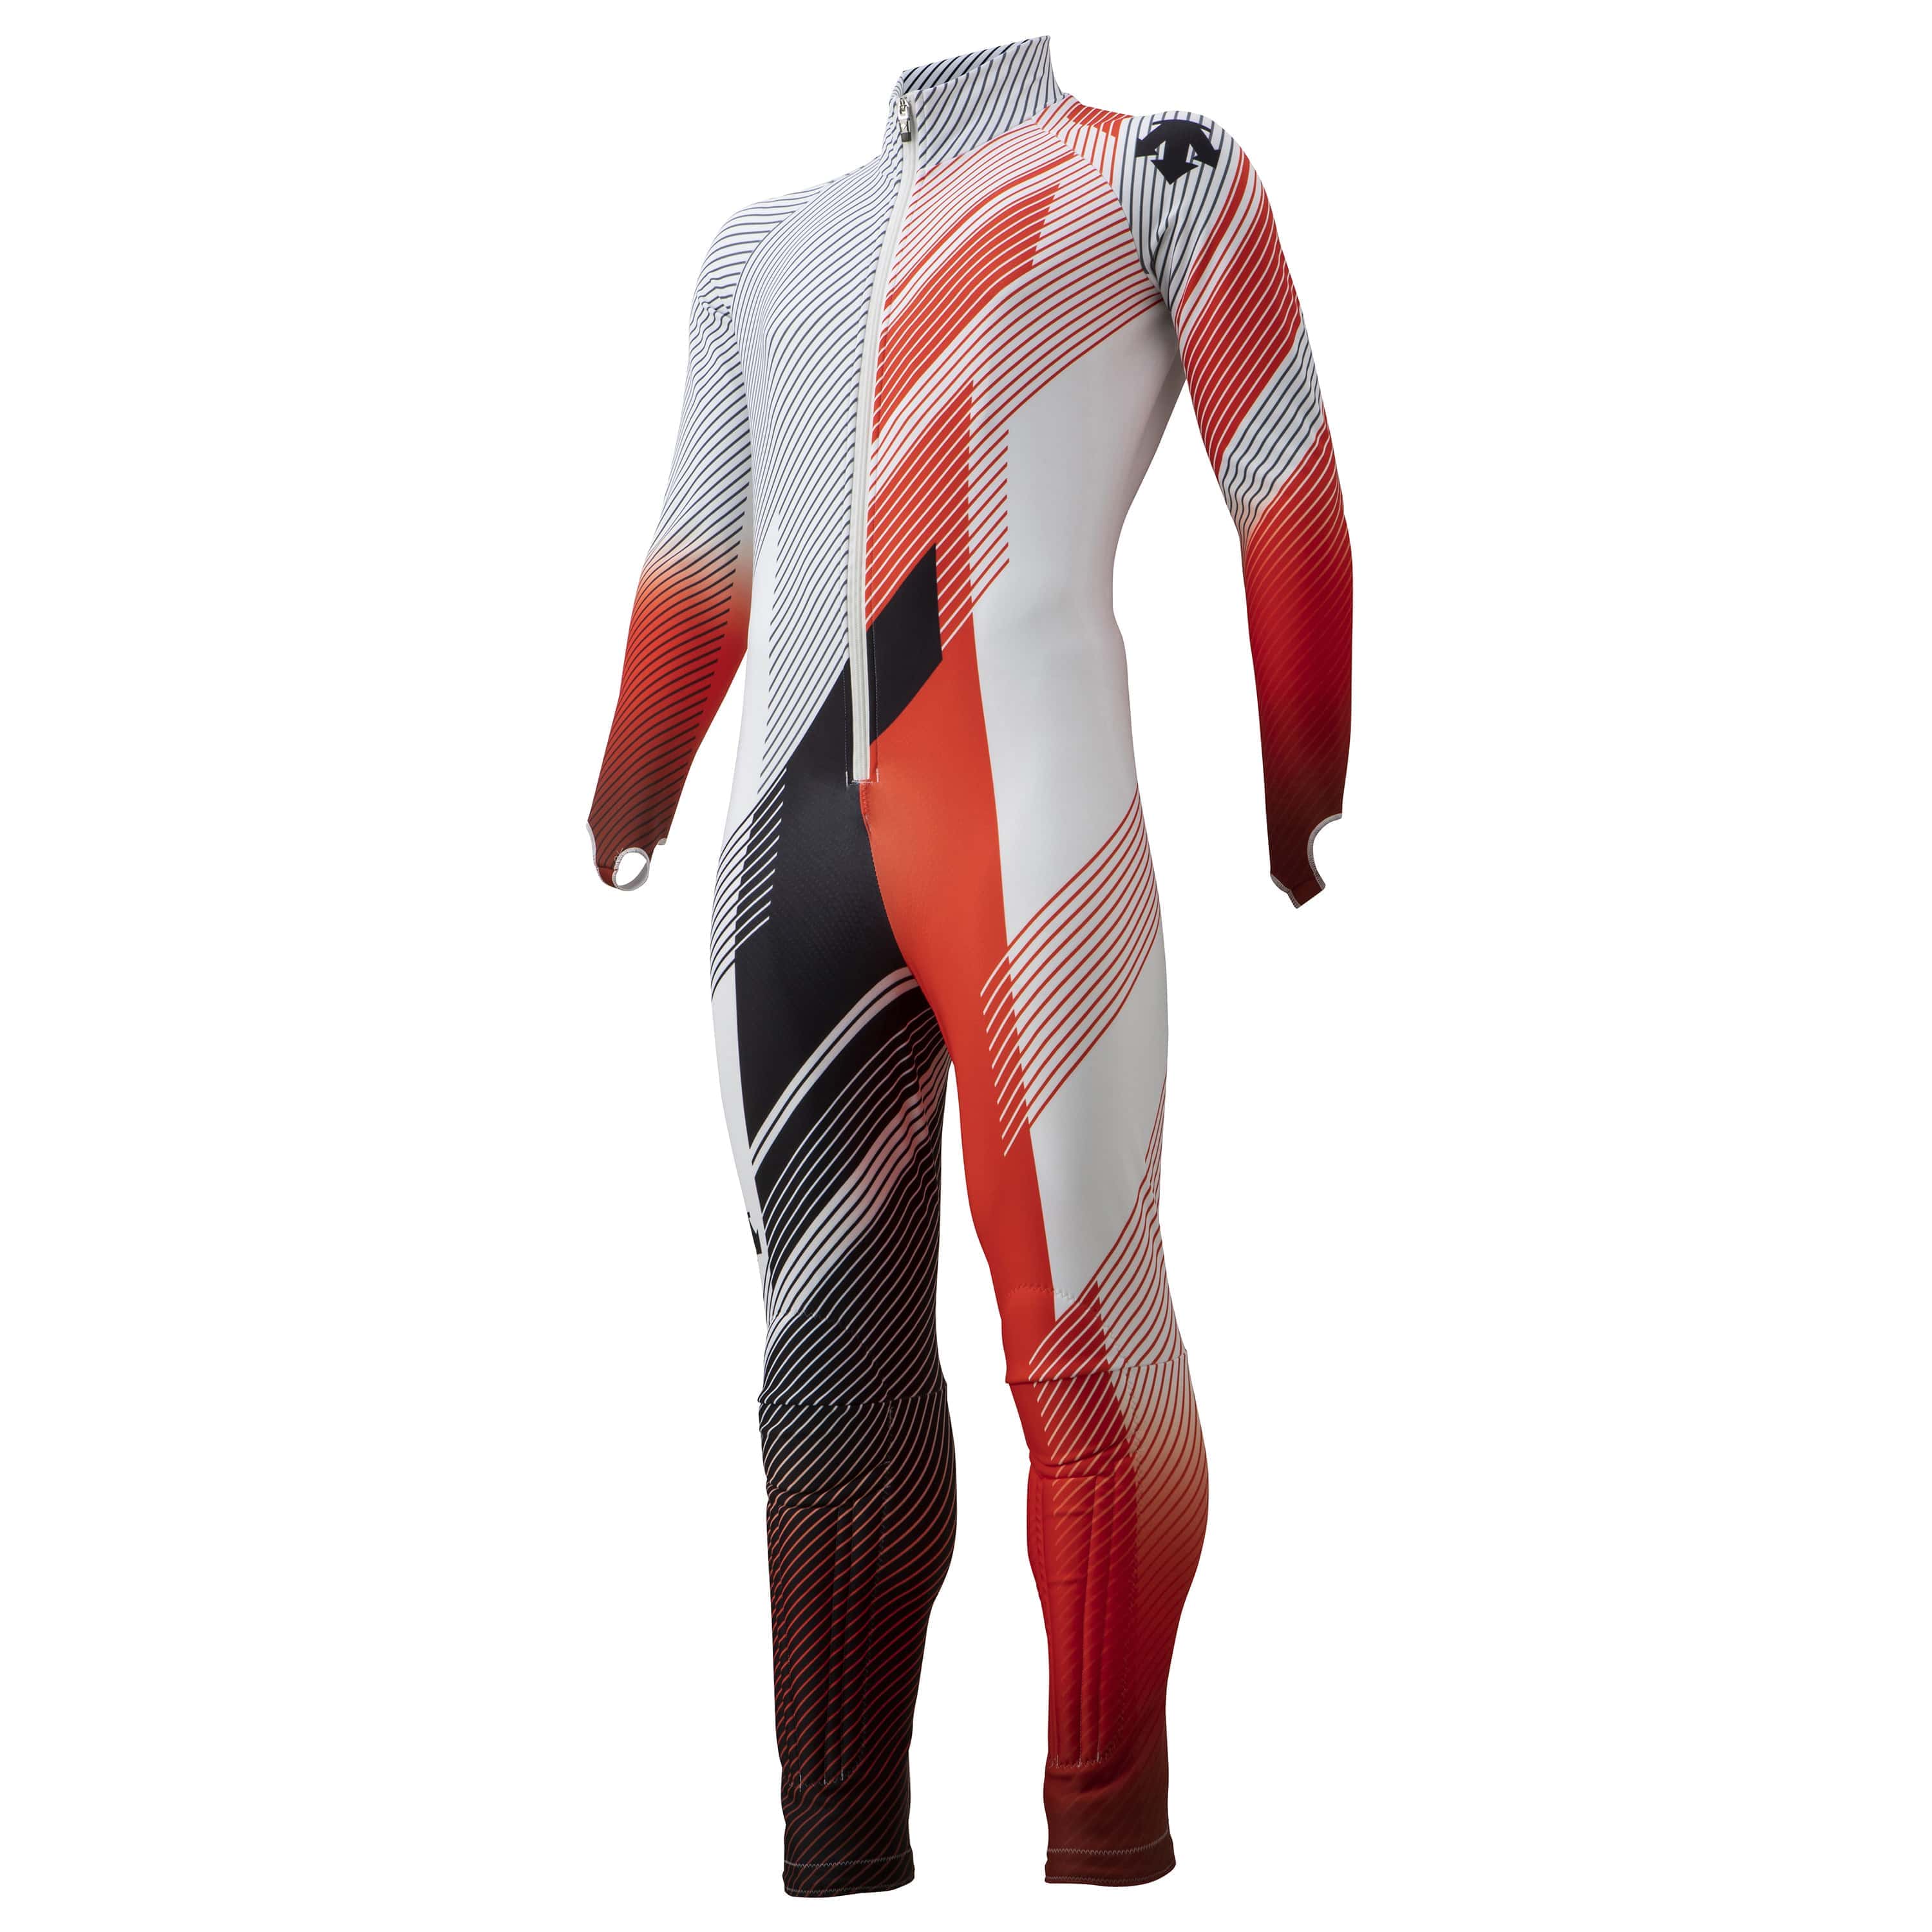 GIANT SLALOM RACE SUITS (Without pad)